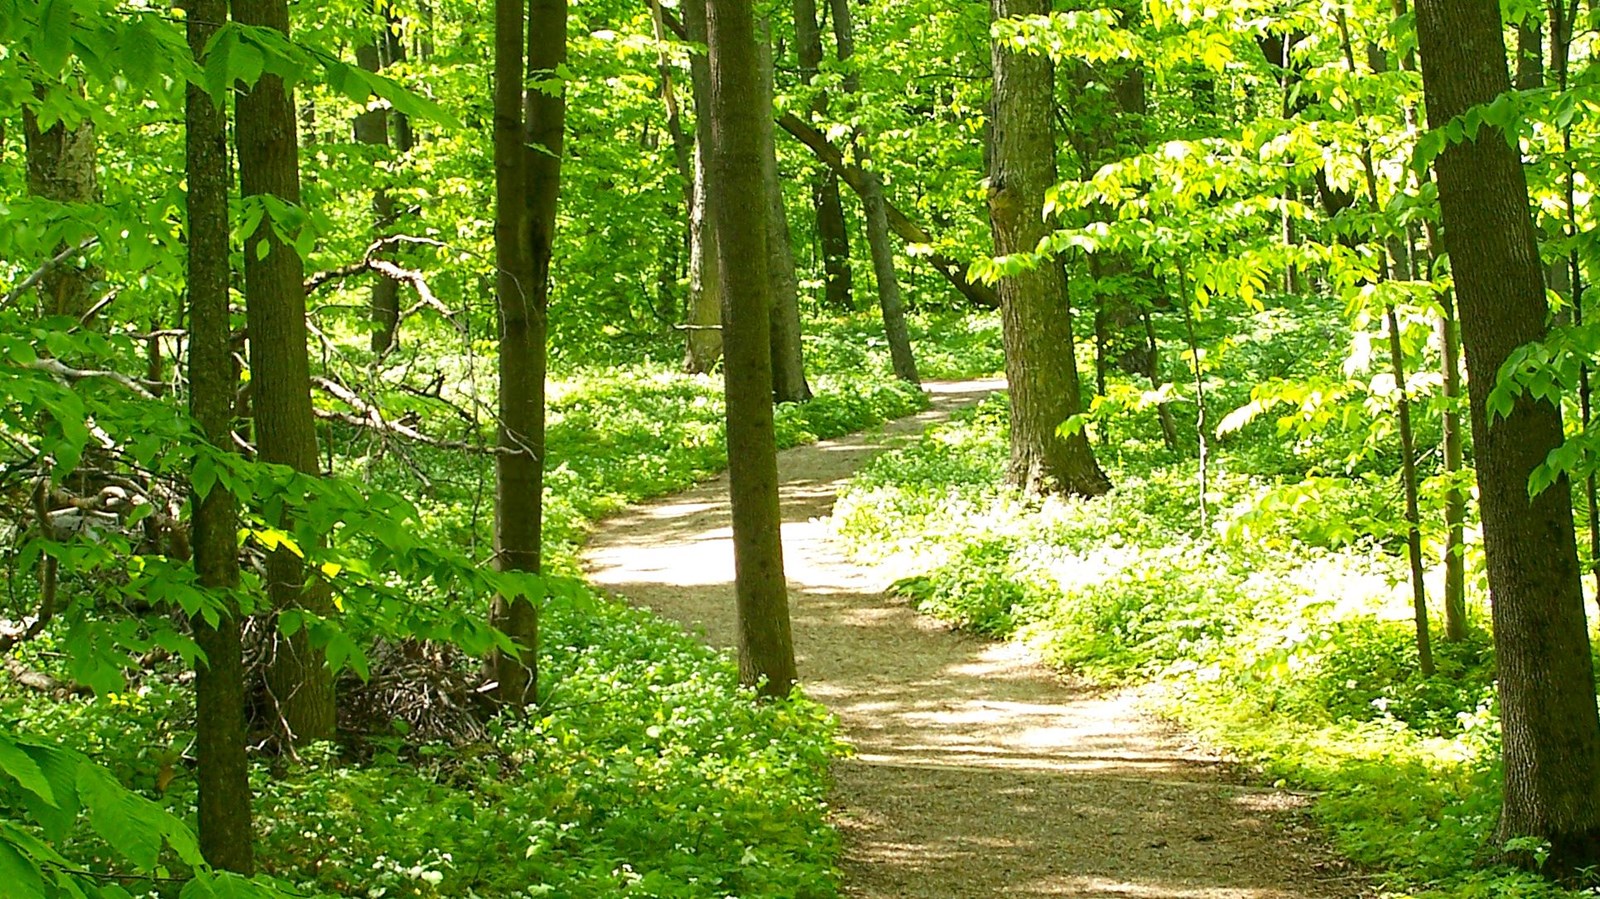 A wide dirt trail winds through a dense, green-leafy forest